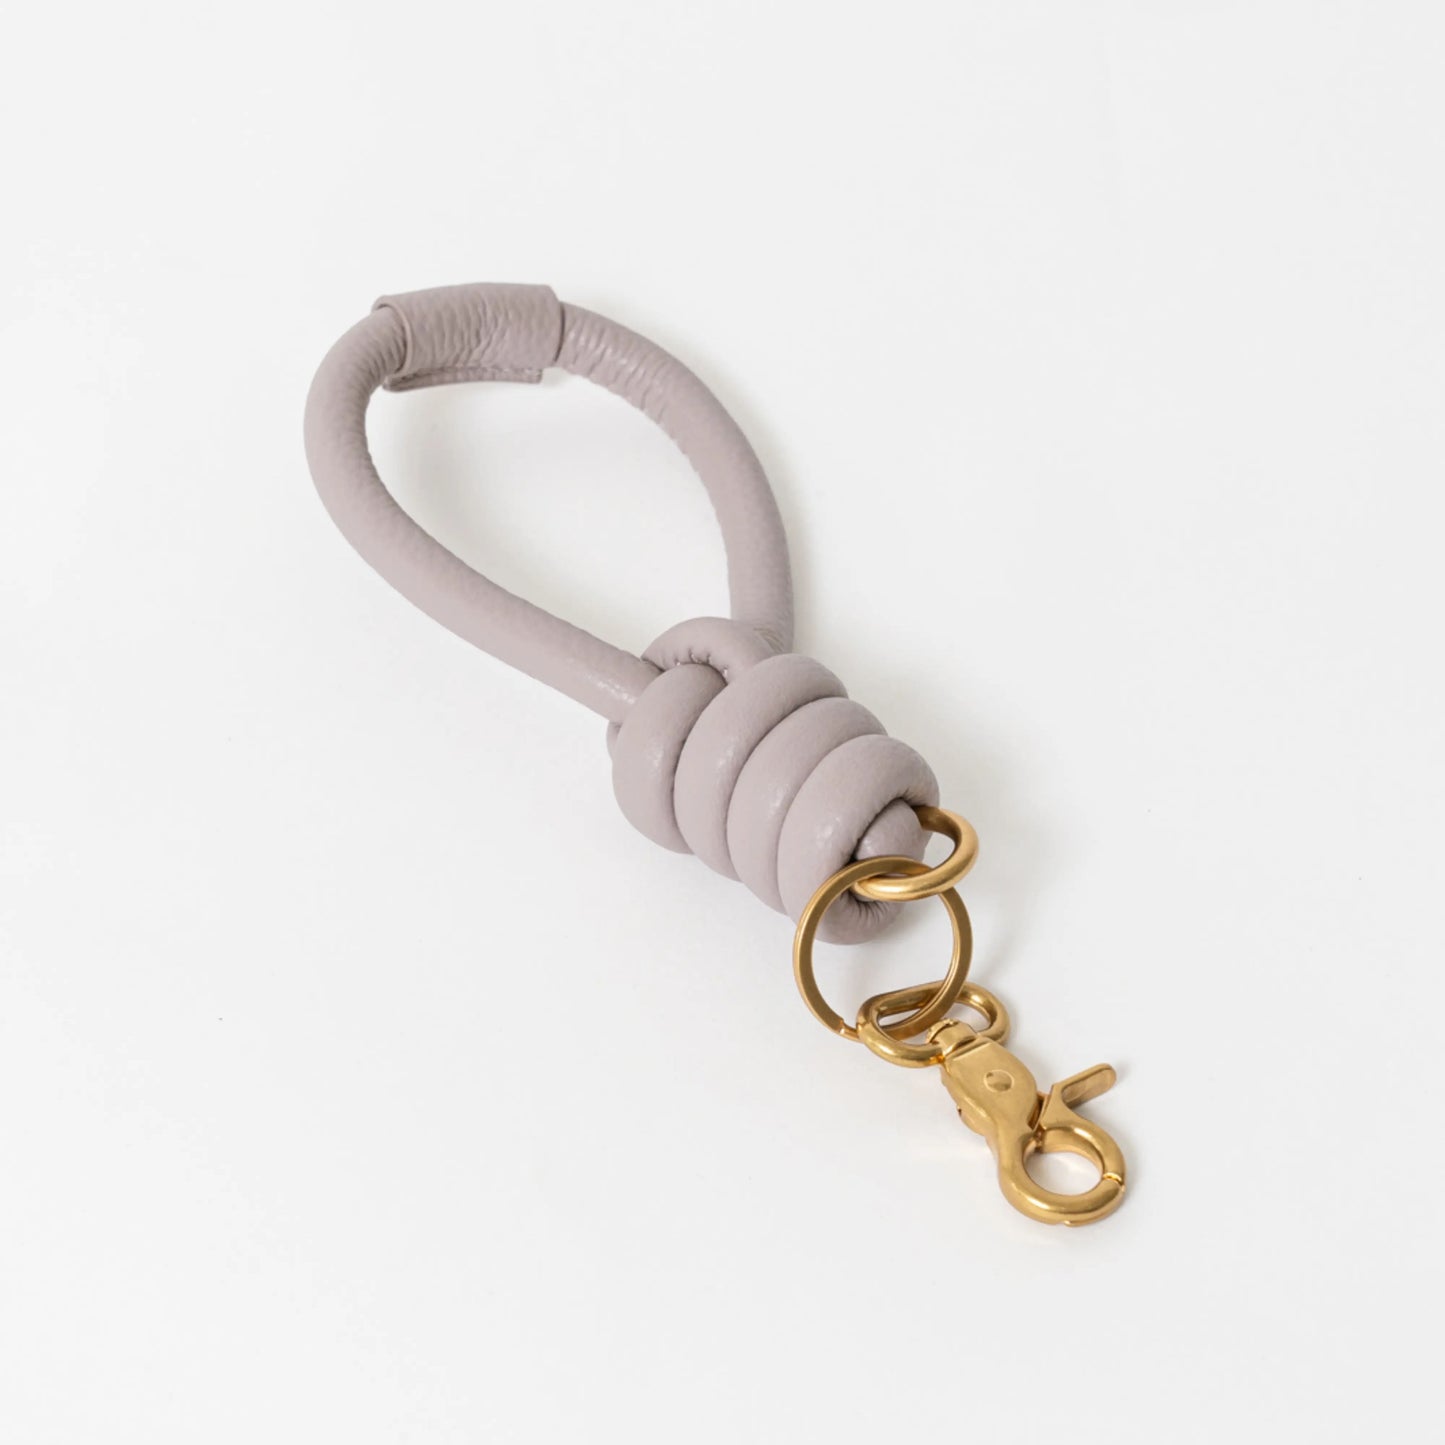 ALF THE LABEL - Luxe Knot Keyring